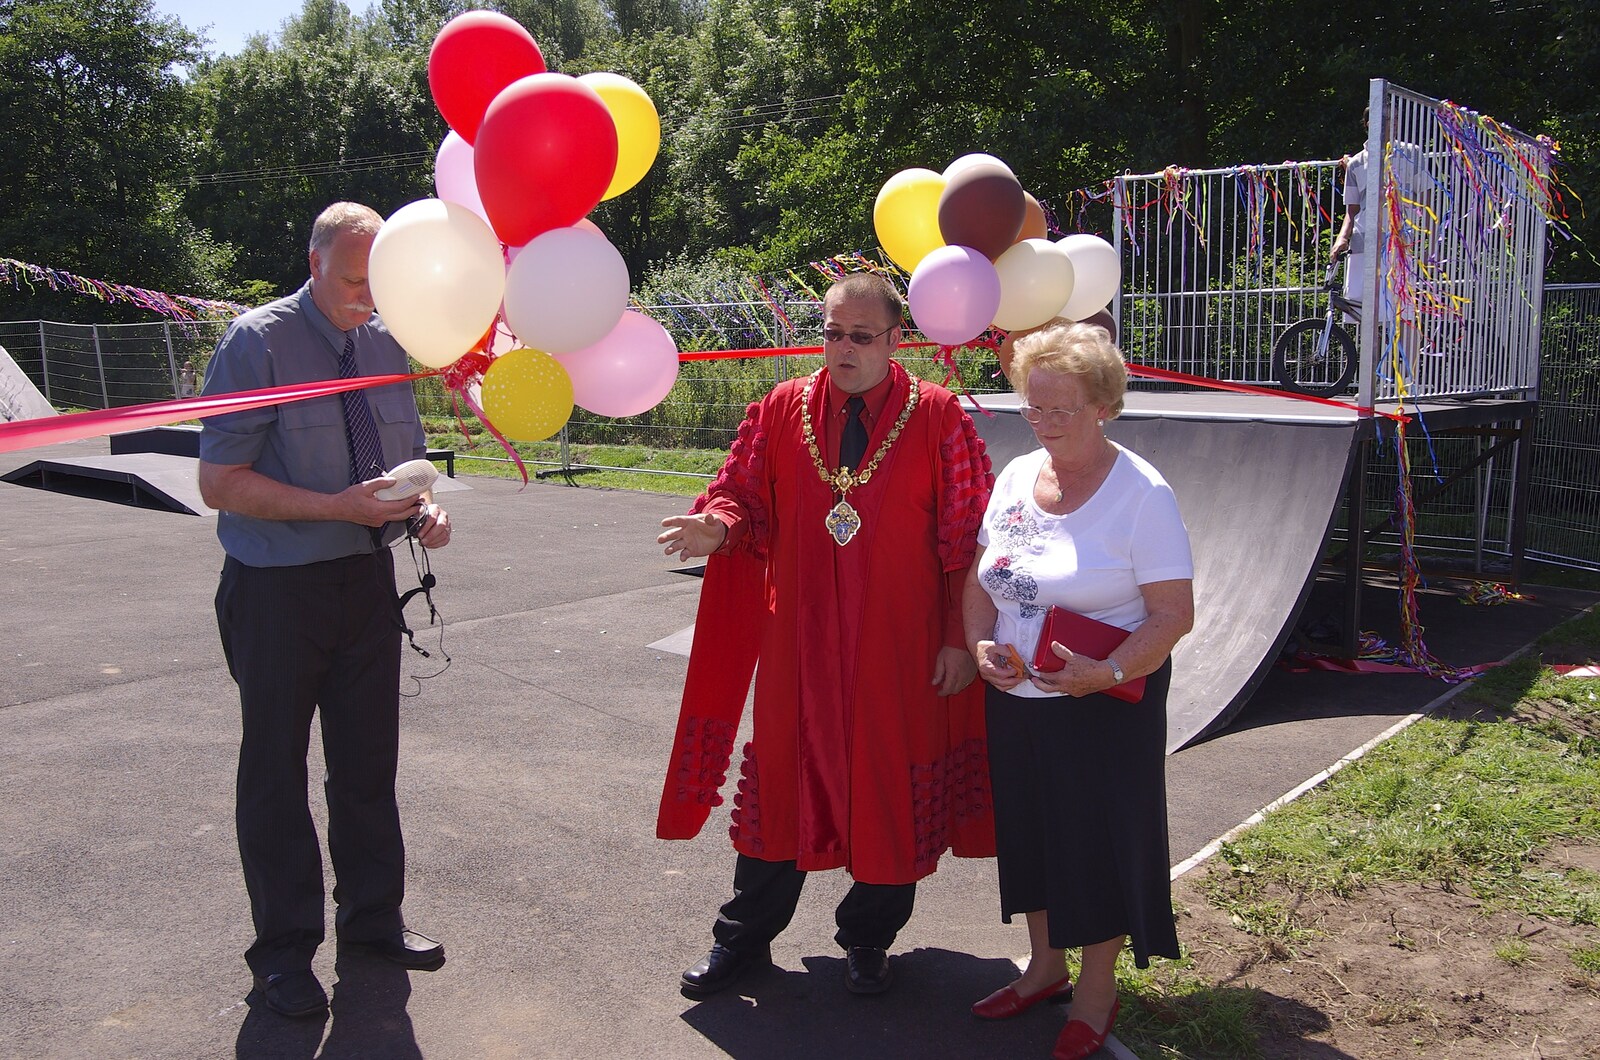 The Opening of Eye Skateboard Park, and The BBs at Cotton, Suffolk - 5th August 2007: The mayor prepares to open the skate park